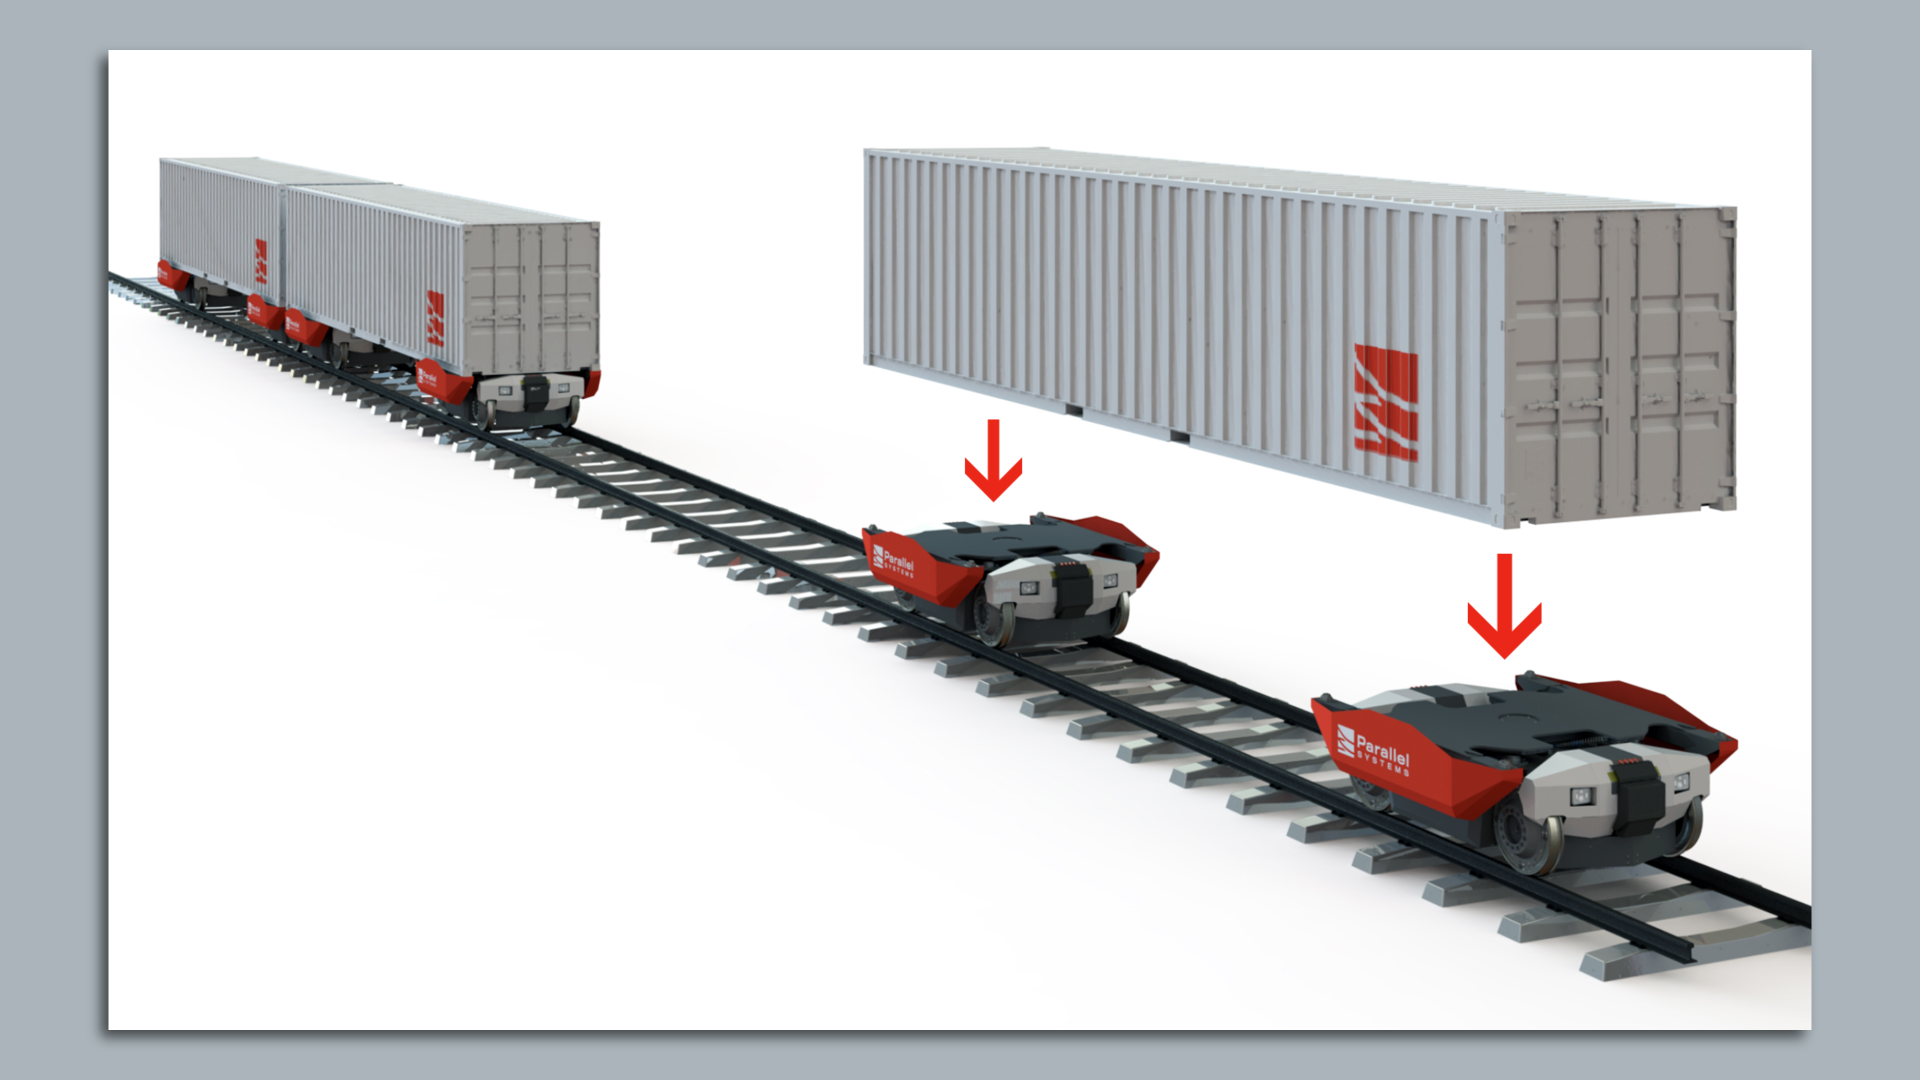 Illustration of cargo containers being loaded onto a pair of autonomous rail cars. 